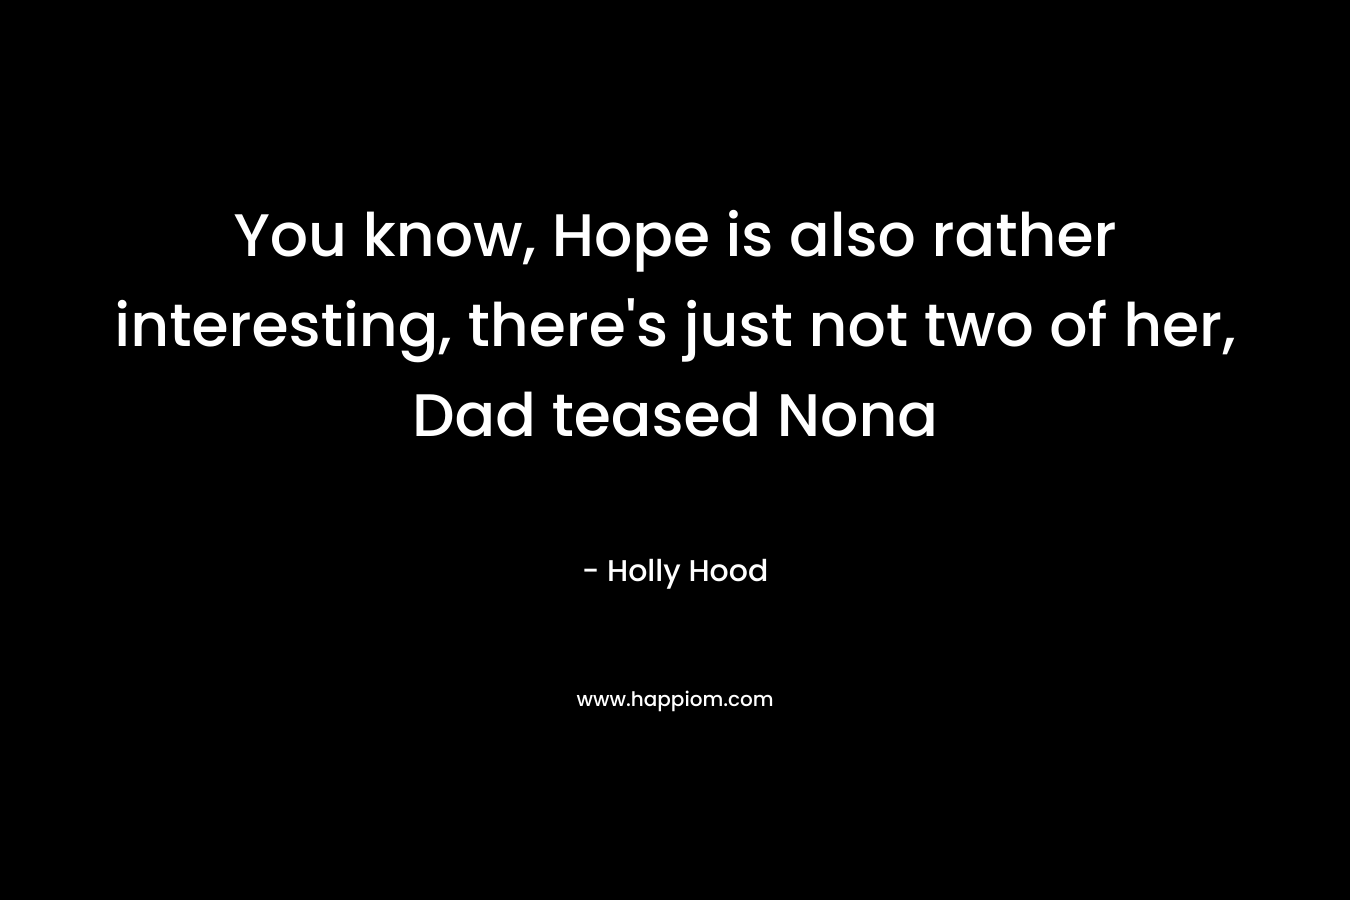 You know, Hope is also rather interesting, there's just not two of her, Dad teased Nona